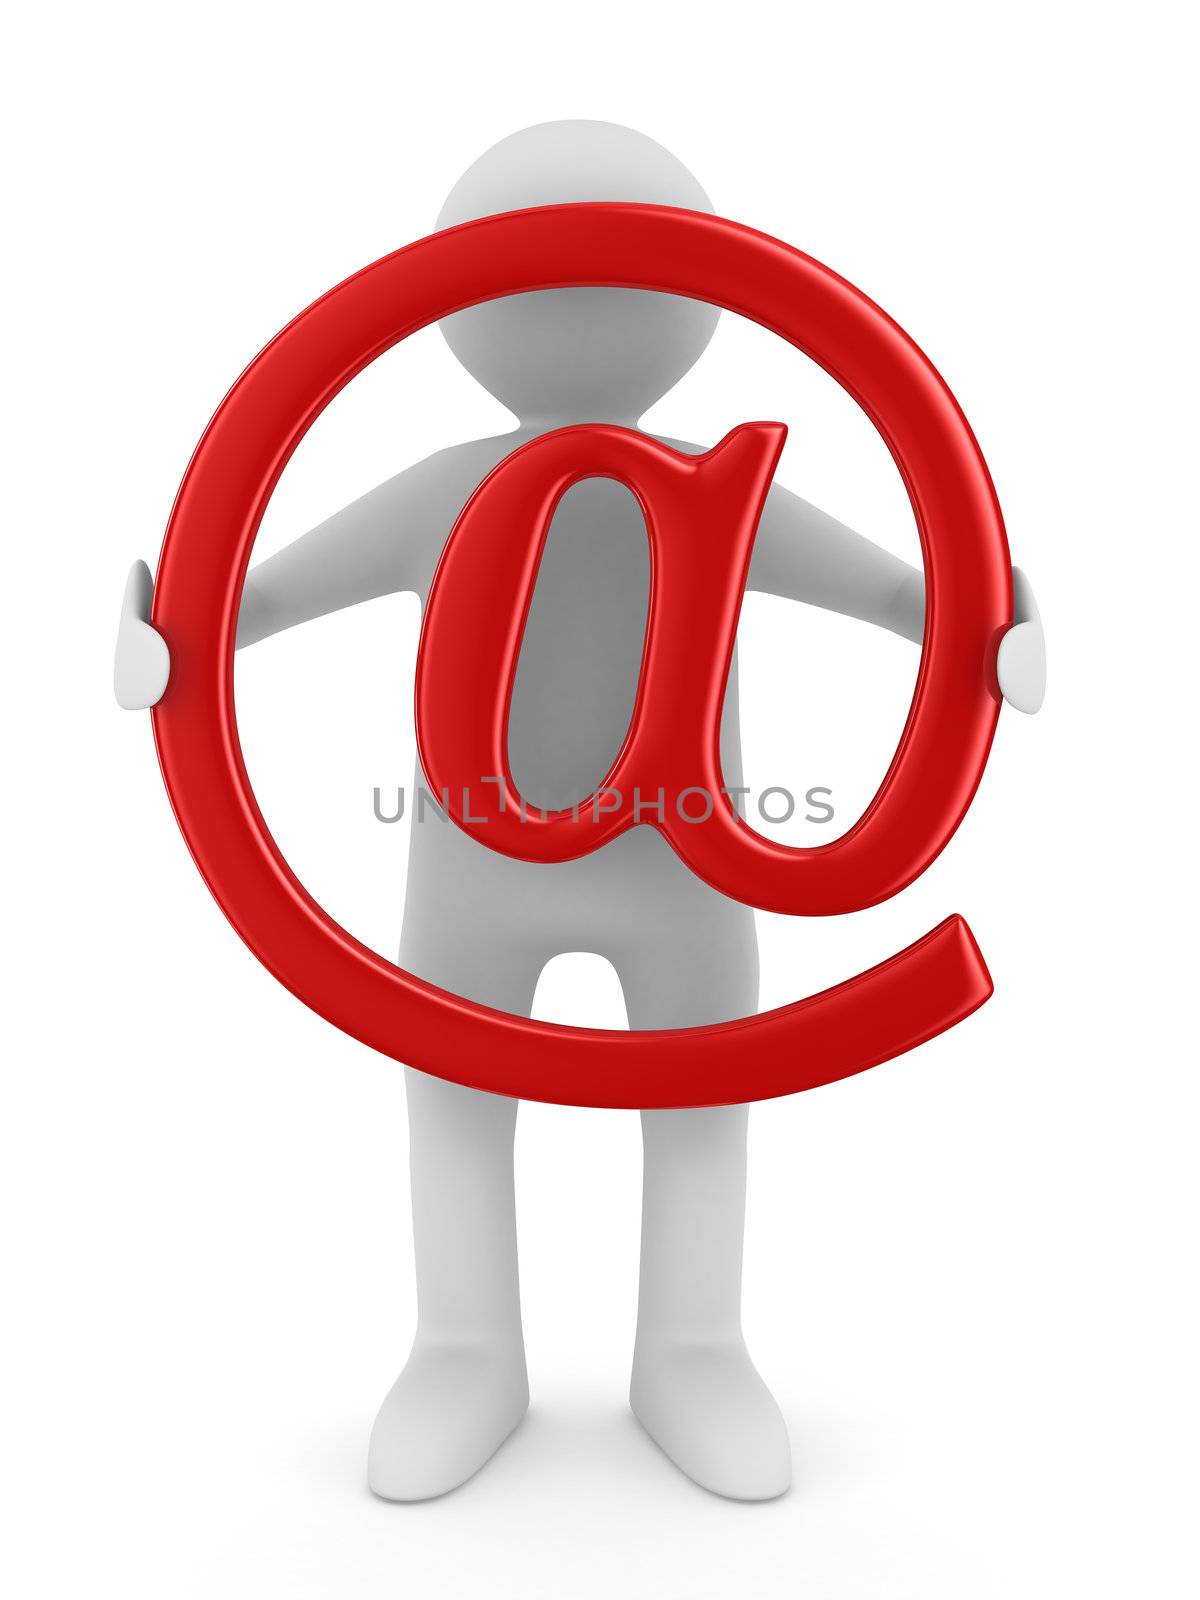 E-mail concept on white background. Isolated 3D image